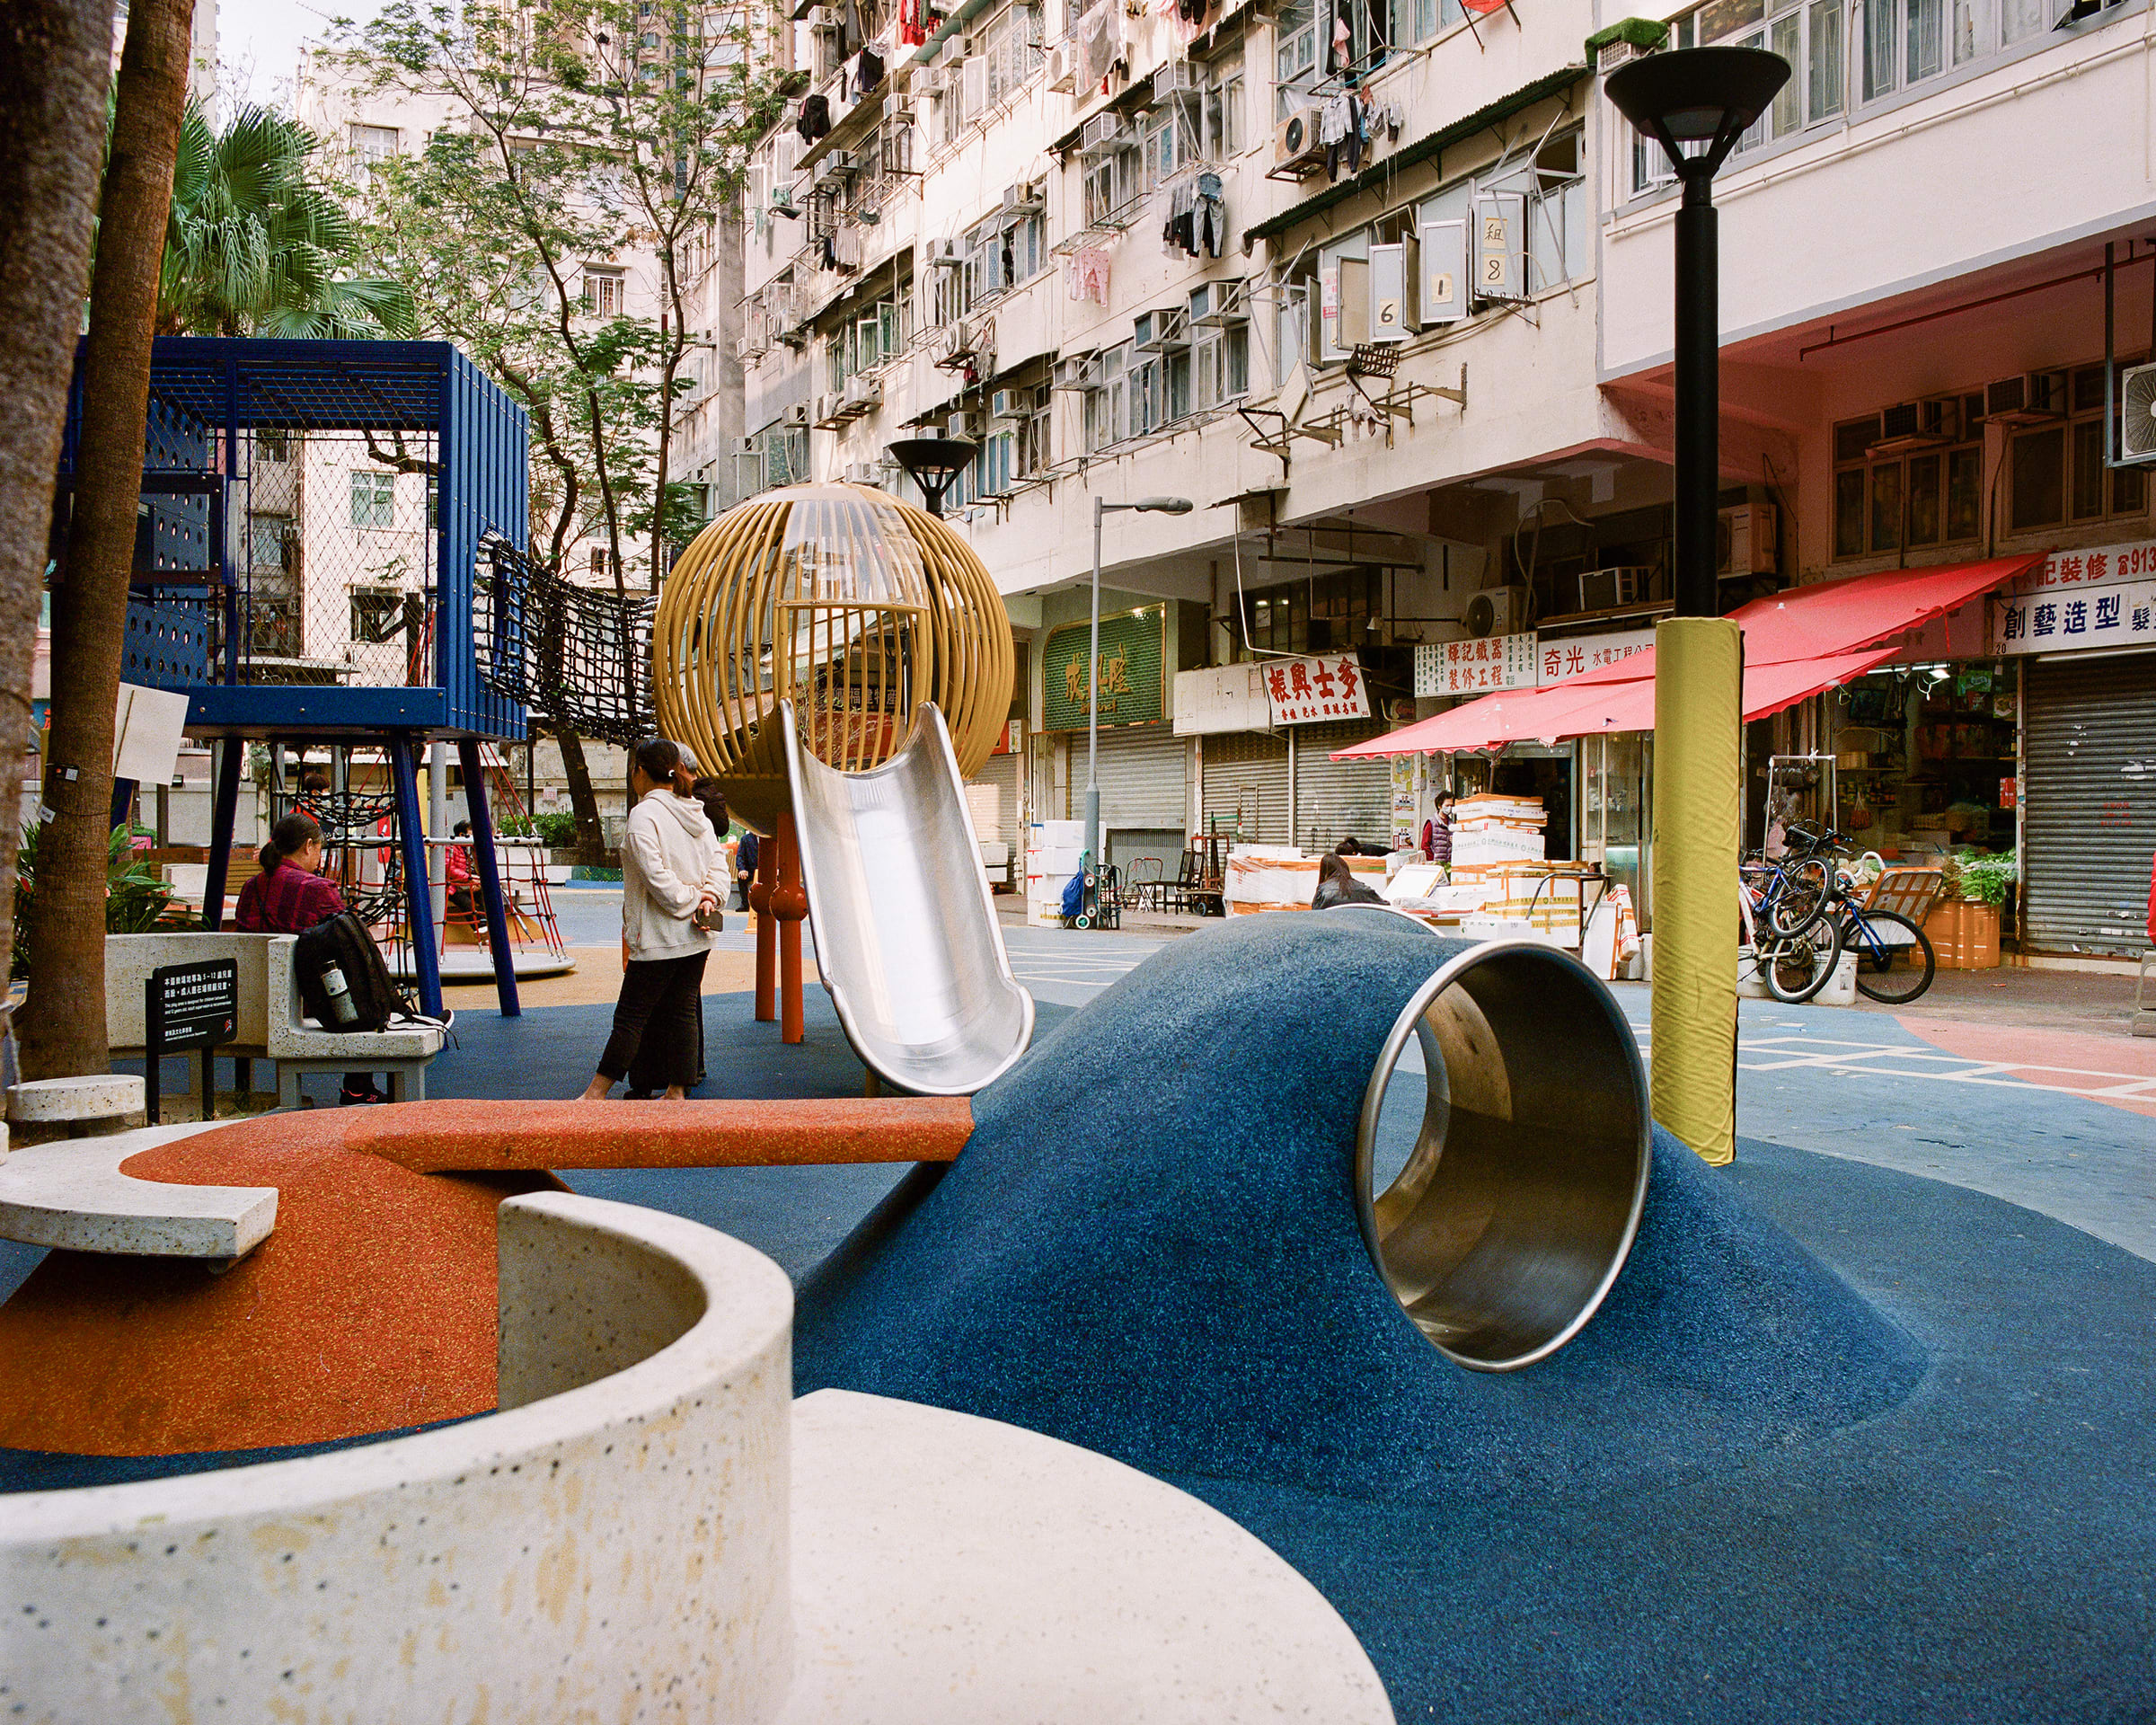  The park in Yi Pei Square done by Design Trust. Photograph by Simon Schilling for Art Basel.